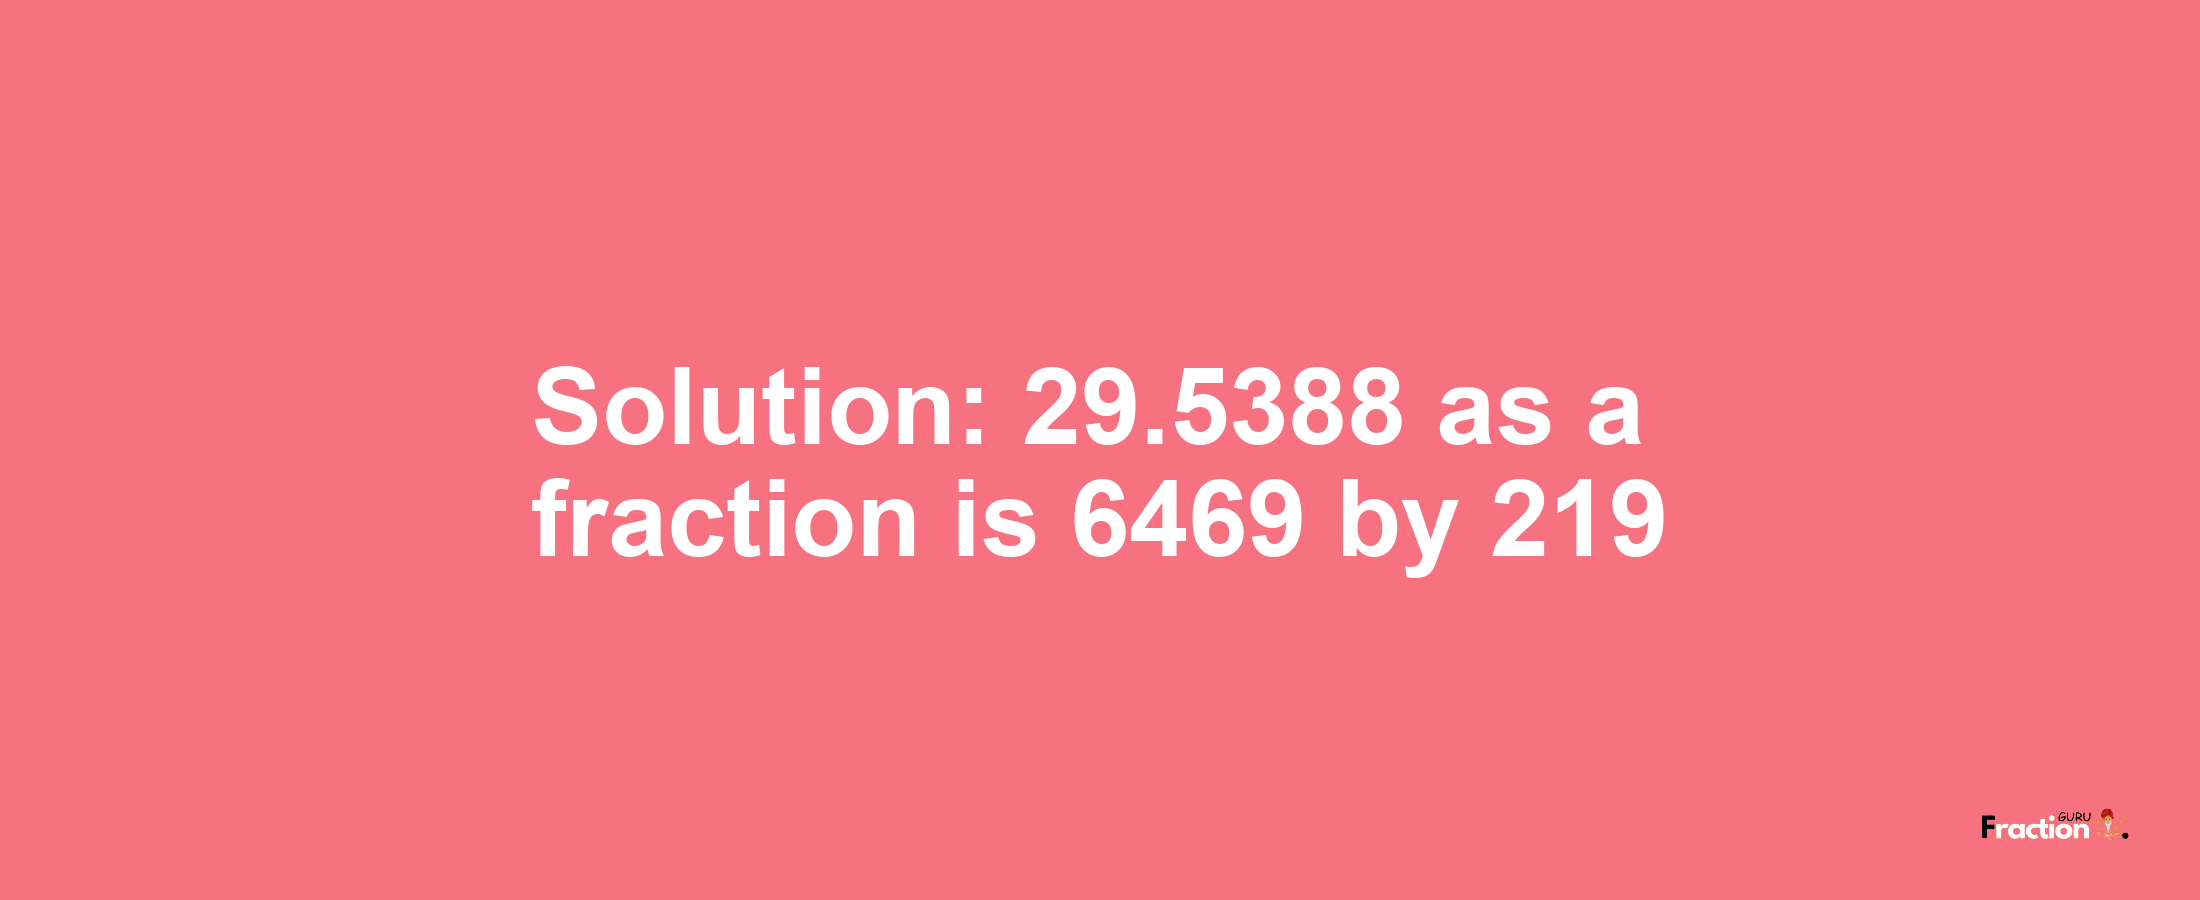 Solution:29.5388 as a fraction is 6469/219